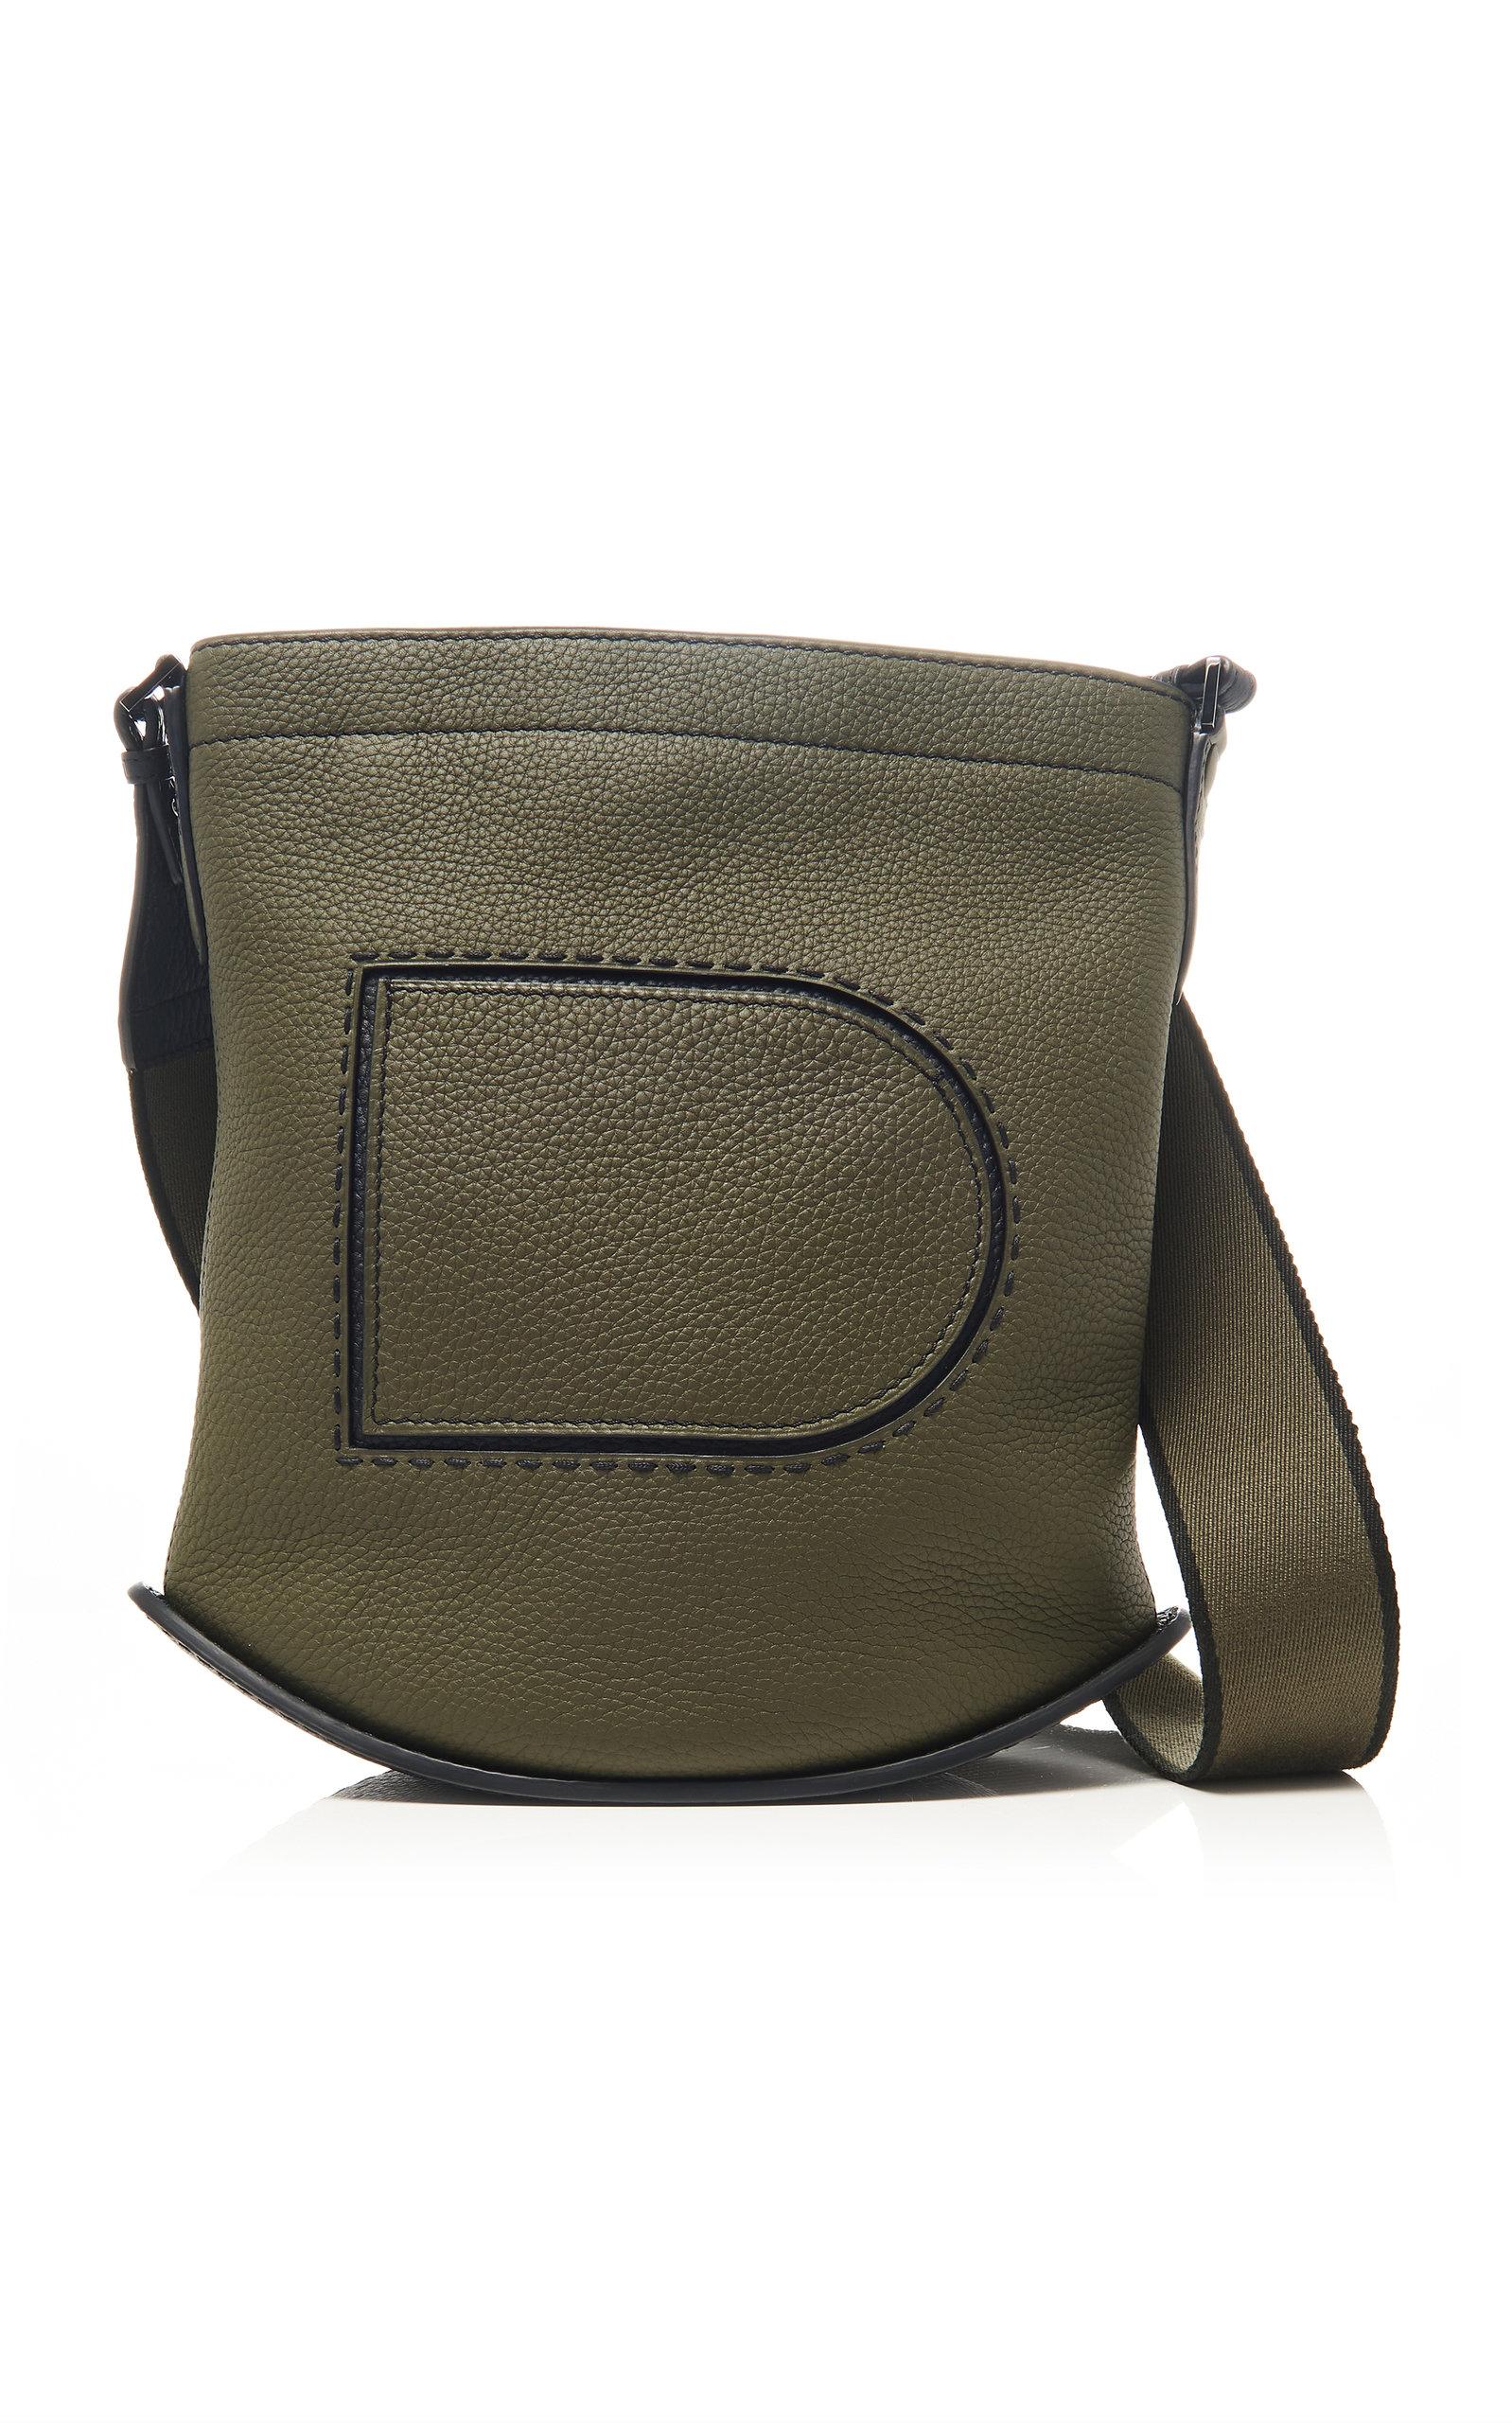 Delvaux Pin Daily And Sangle Taurillon Soft Surpiqué Leather